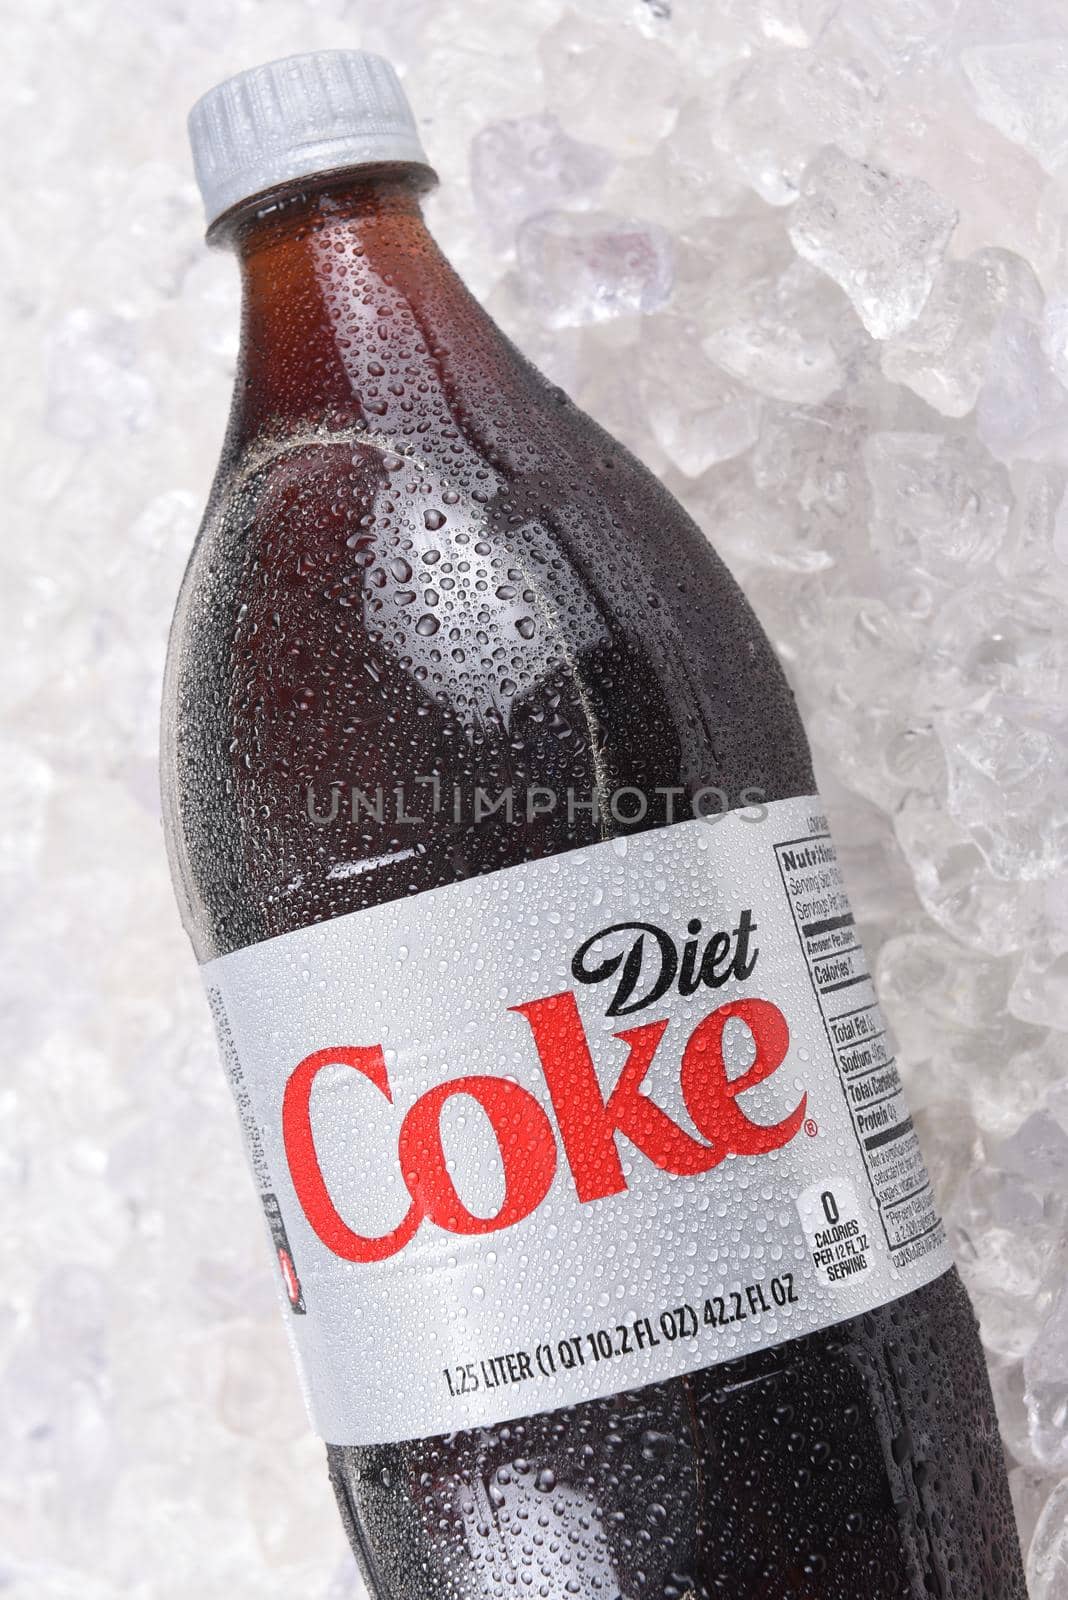 IRVINE, CALIFORNIA - DECEMBER 15, 2017: A bottle of Diet Coke on ice. Coca-Cola is the one of the worlds favorite carbonated beverages.